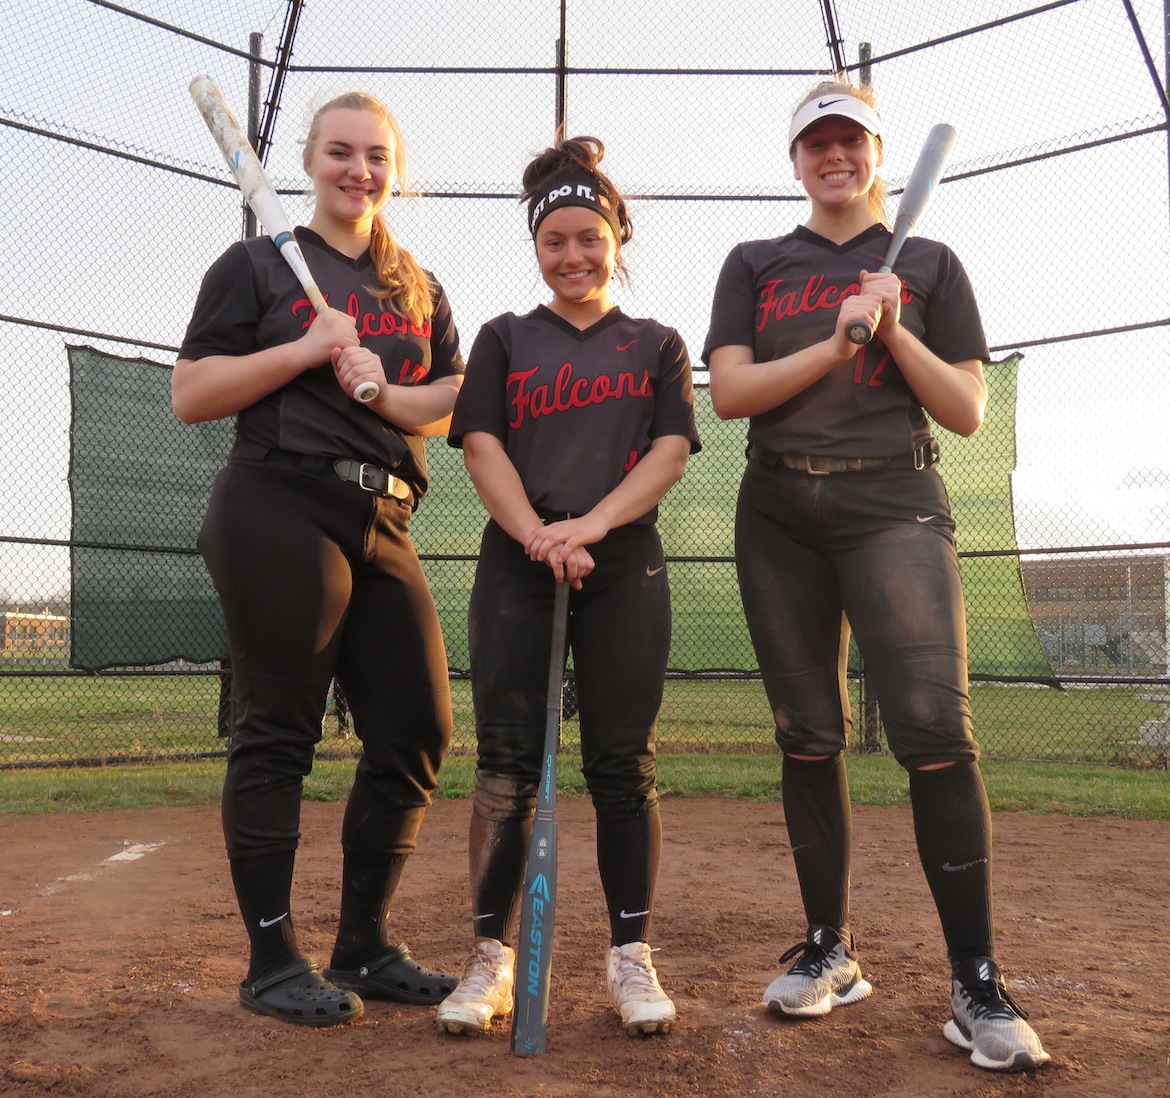 From left, Mackenzie Quider, Maddie Evarts and Mackenzie Franks pose for a photo following the team's 5-4 win over Lewiston-Porter. The trio of captains have a combined 16 years of varsity experience. (Photo by David Yarger)